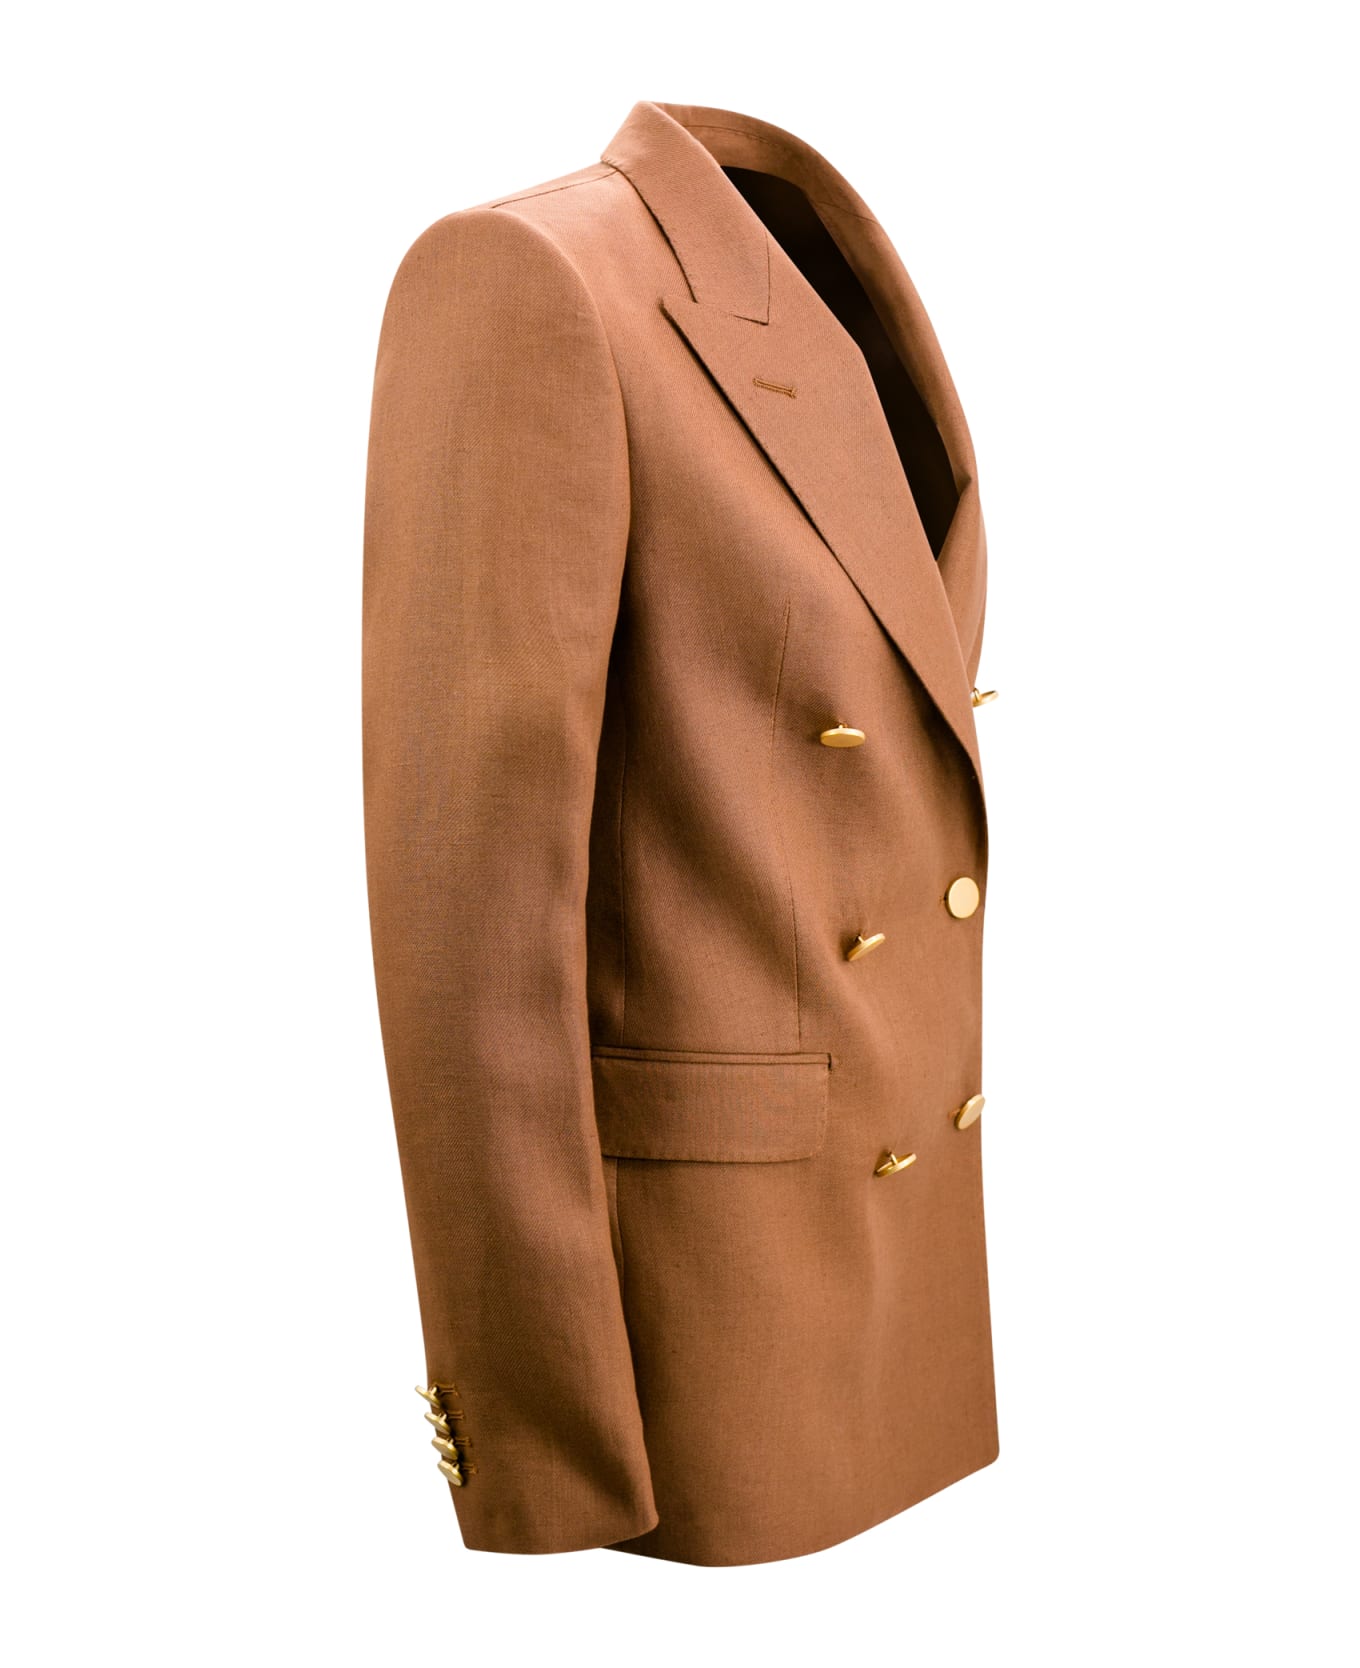 Tagliatore Full Suit With Double-breasted Blazer With Peaked Lapels And Straight Pants. - Cioccolato